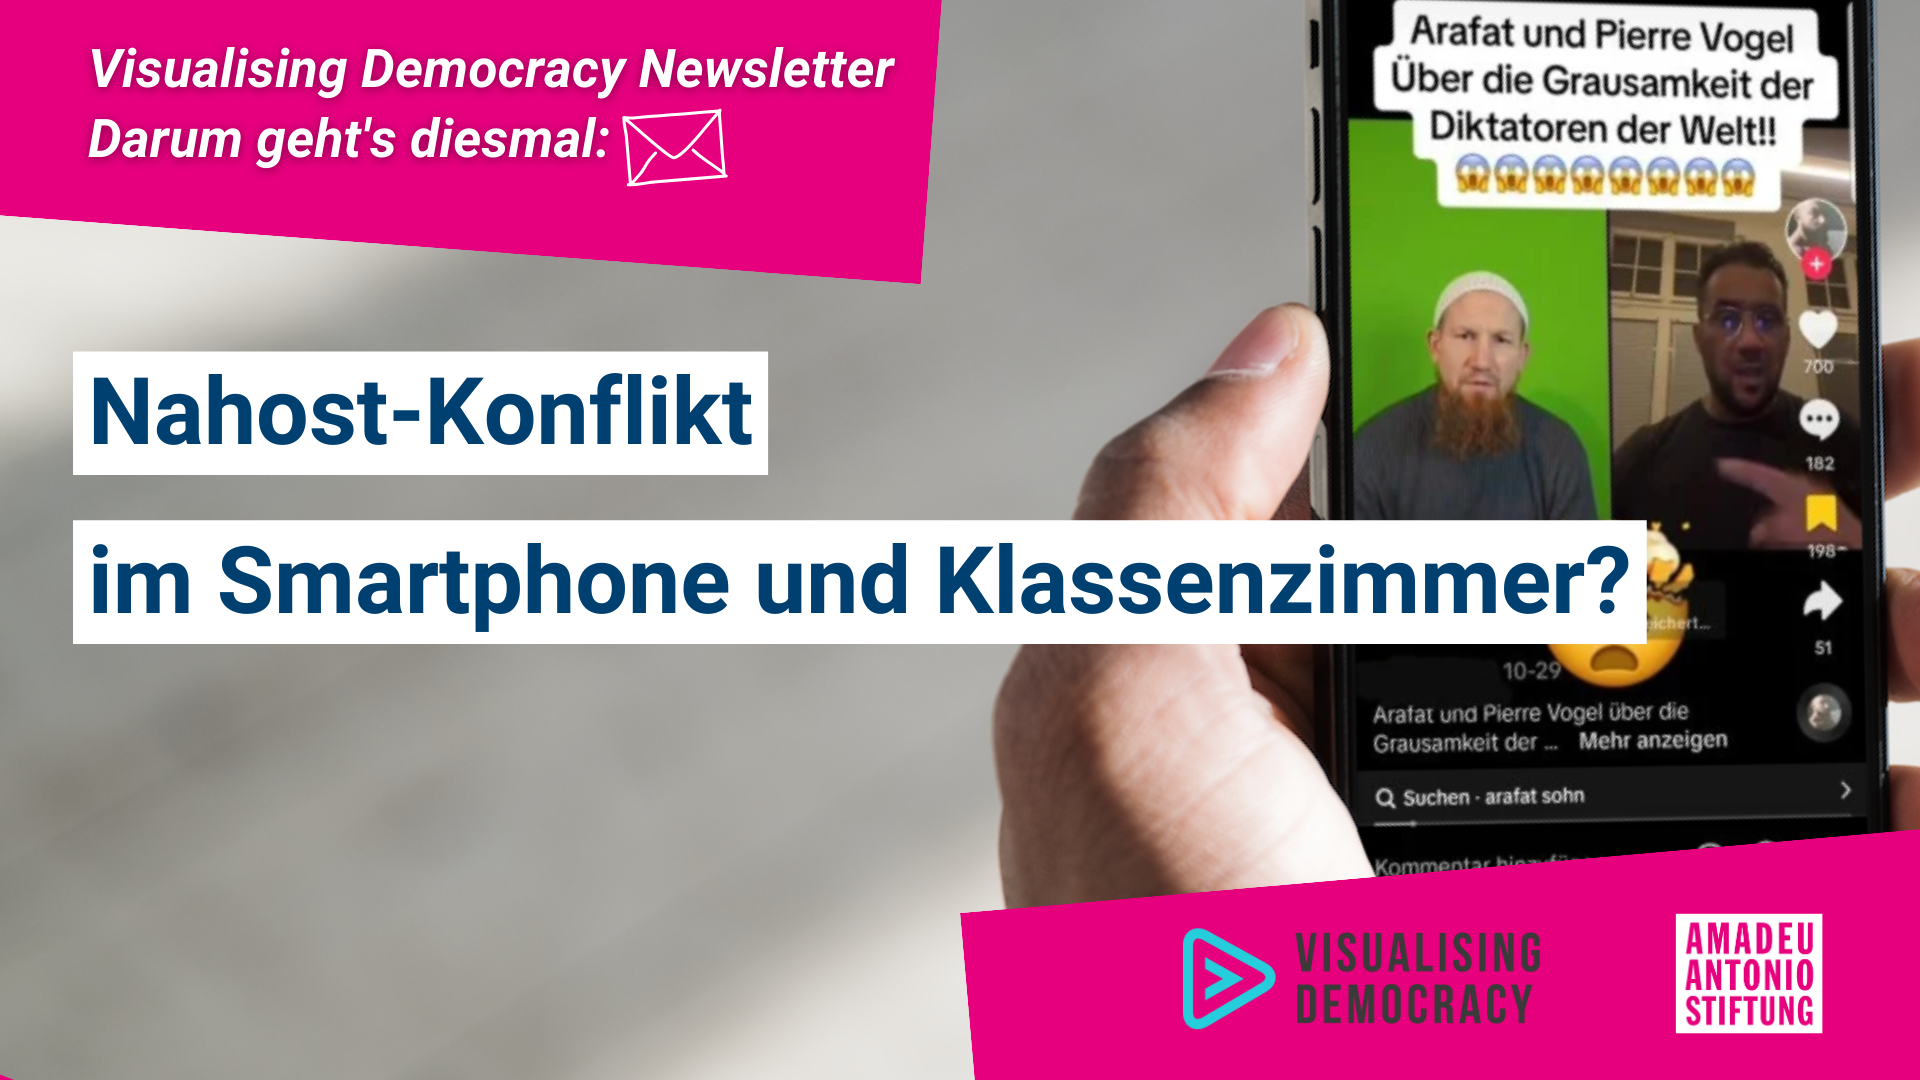 Newsletter Reel Cover Visualising Democracy (1920 x 1080 px)(1)